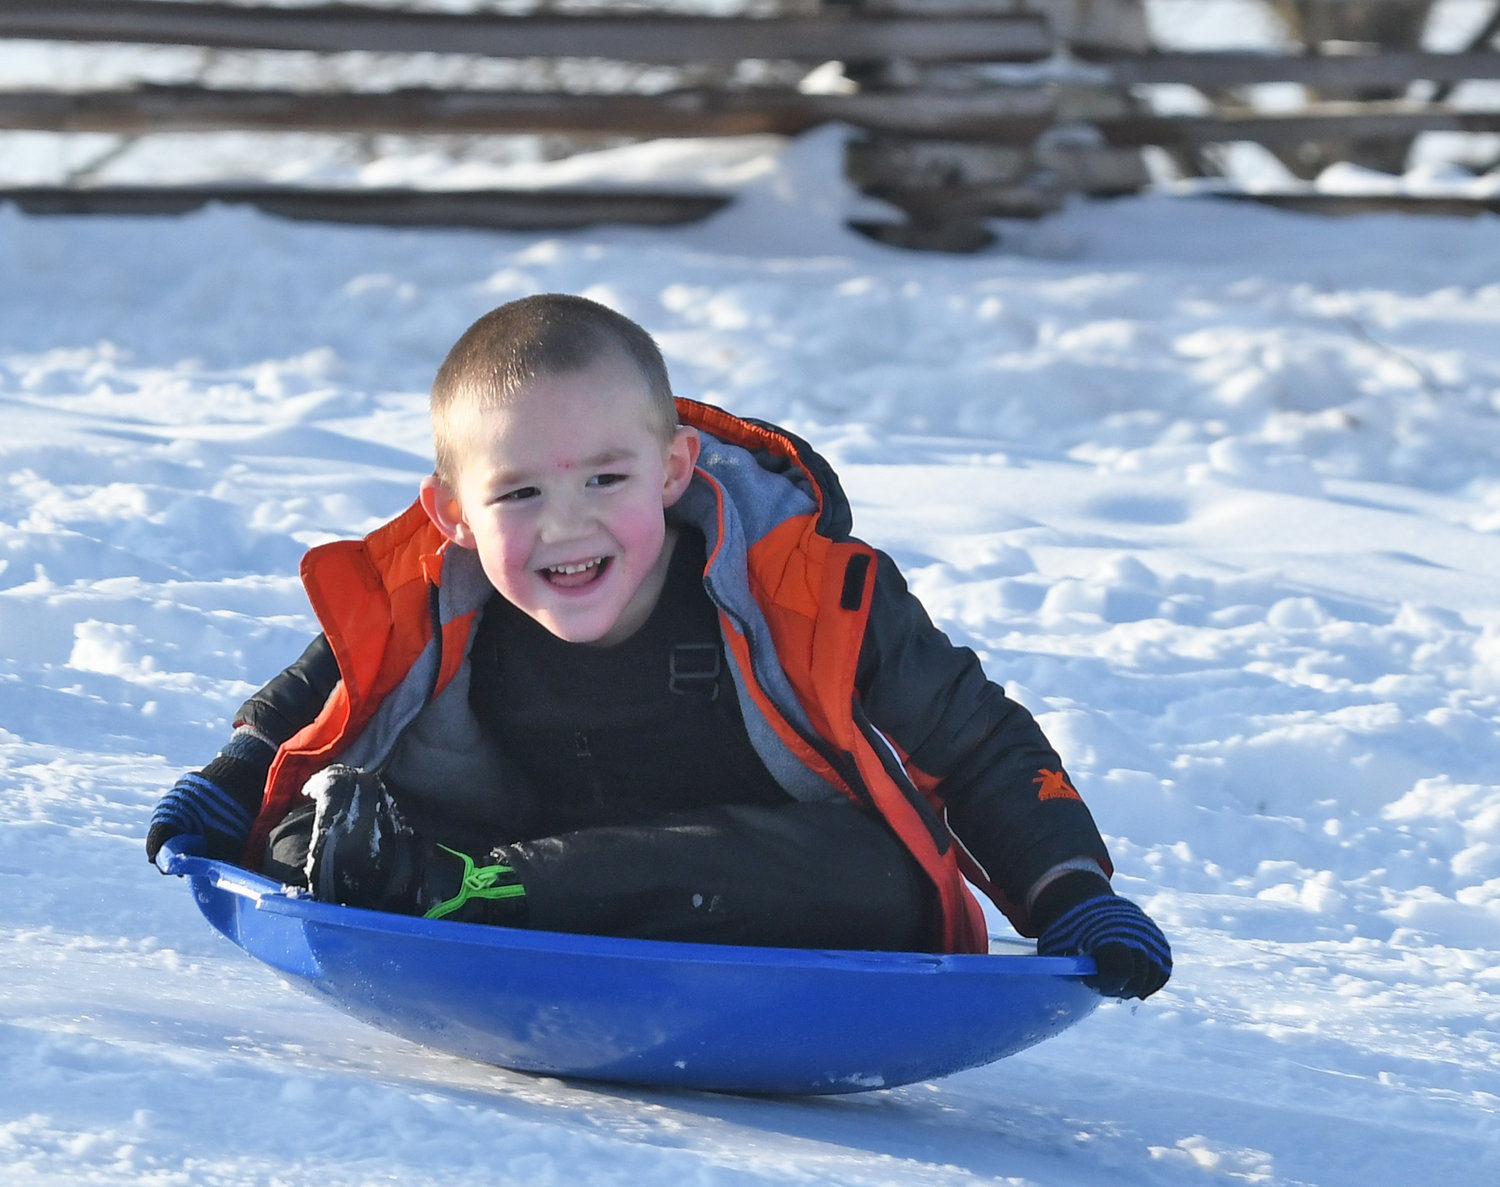 SOME SNOWY FUN — Julian Snyder slides down a hill at Lee Town Park on Monday afternoon. He was there with his mom Rochelle Snyder and grandmother Laura Nolan, both of Rome.